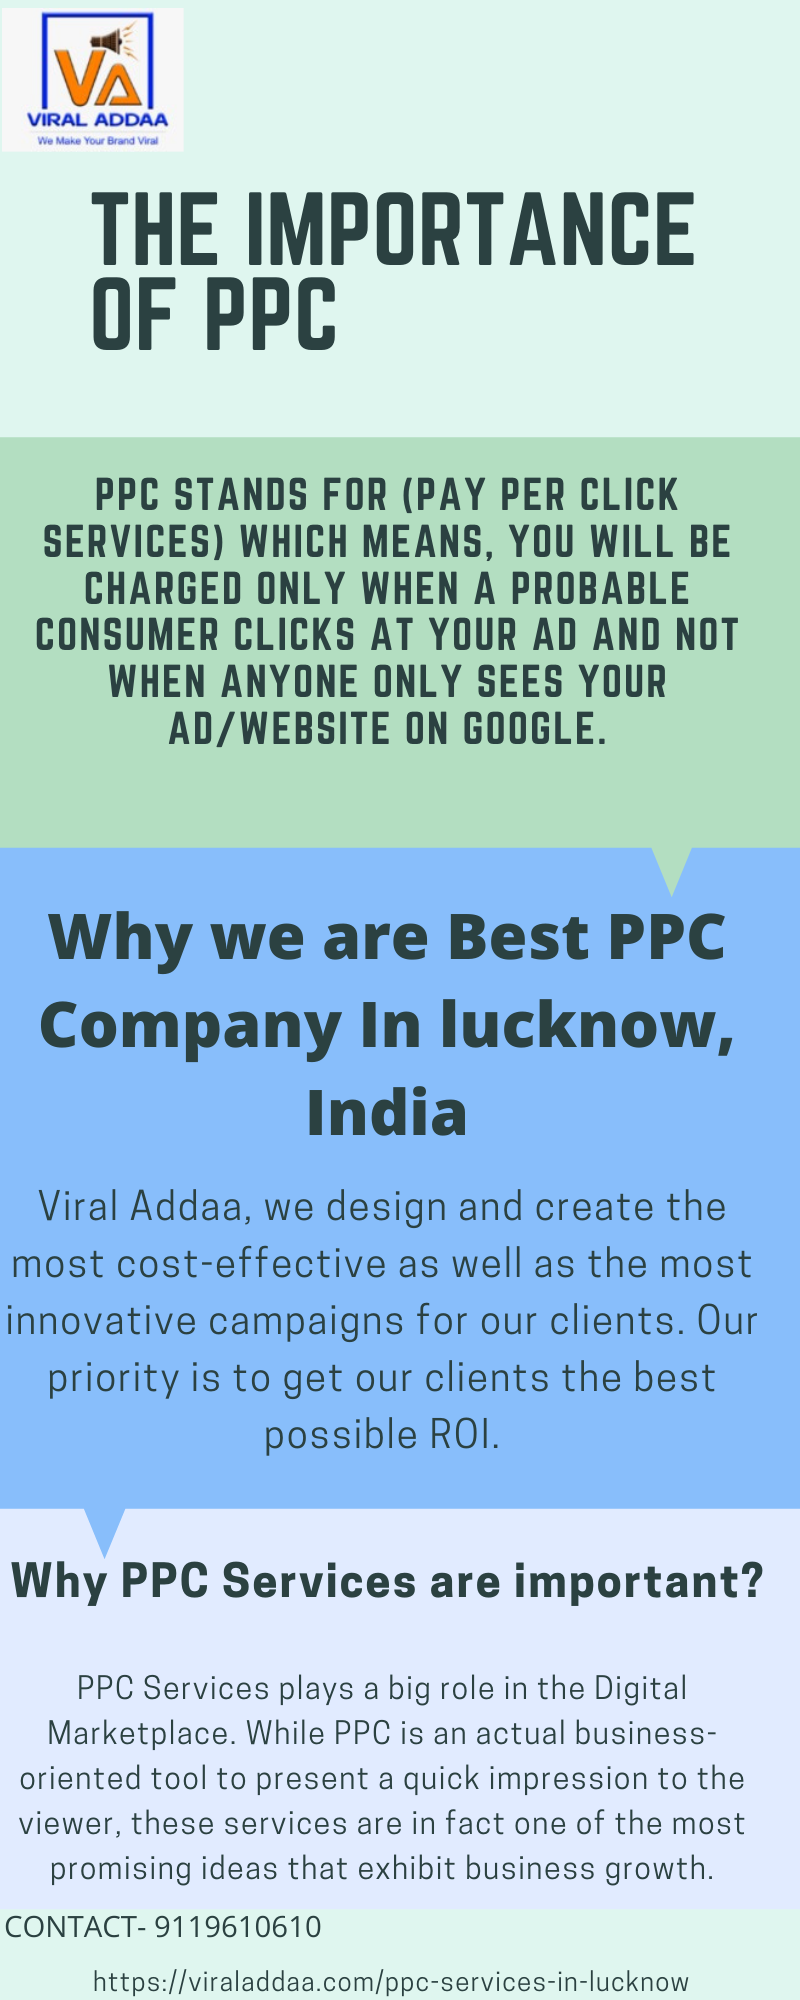 Struggling to get leads? The best PPC Services in Lucknow got your back. 
        With our experienced team we make sure your ad appears on SERP & get more quality leads